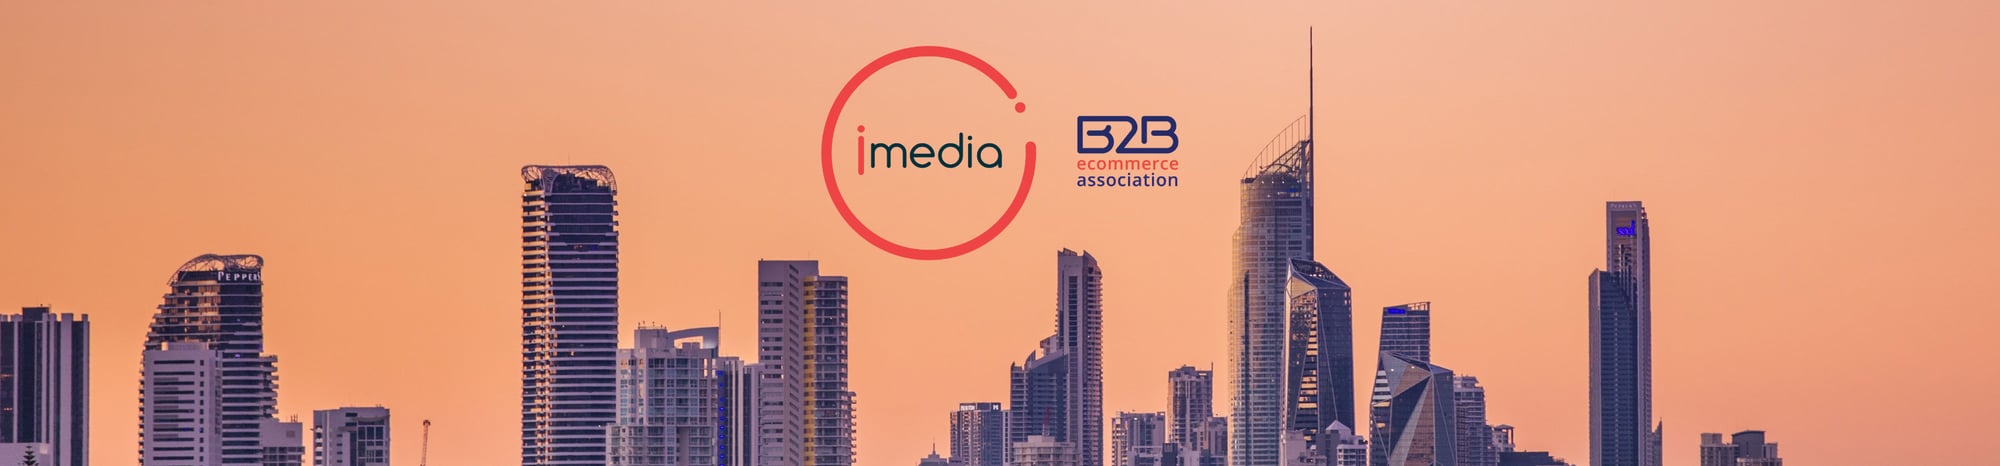 iMedia B2B eCommerce Summit delivered in partnership with the B2B eCommerce Association